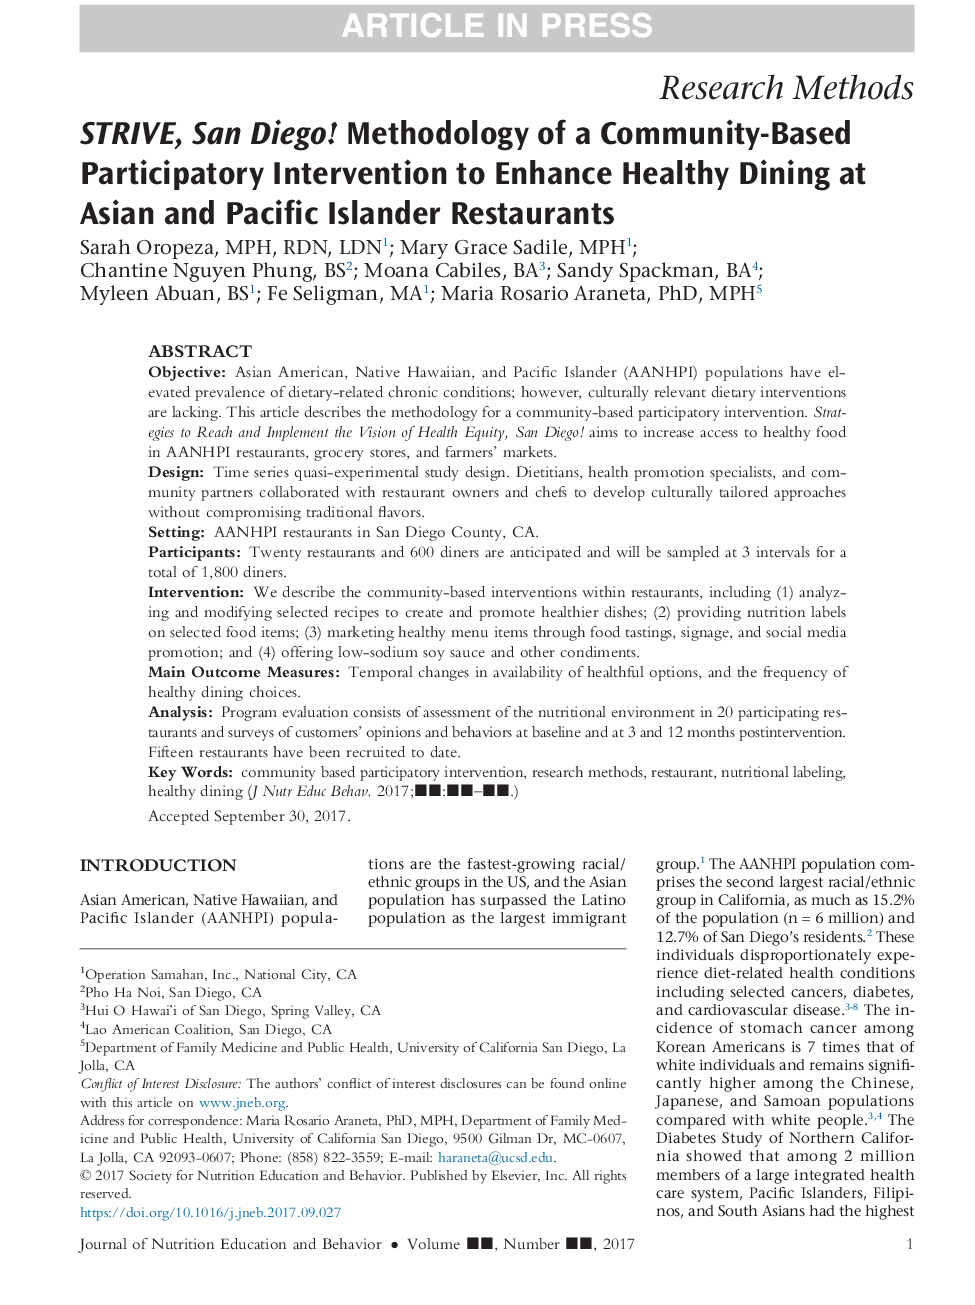 STRIVE, San Diego! Methodology of a Community-Based Participatory Intervention to Enhance Healthy Dining at Asian and Pacific Islander Restaurants